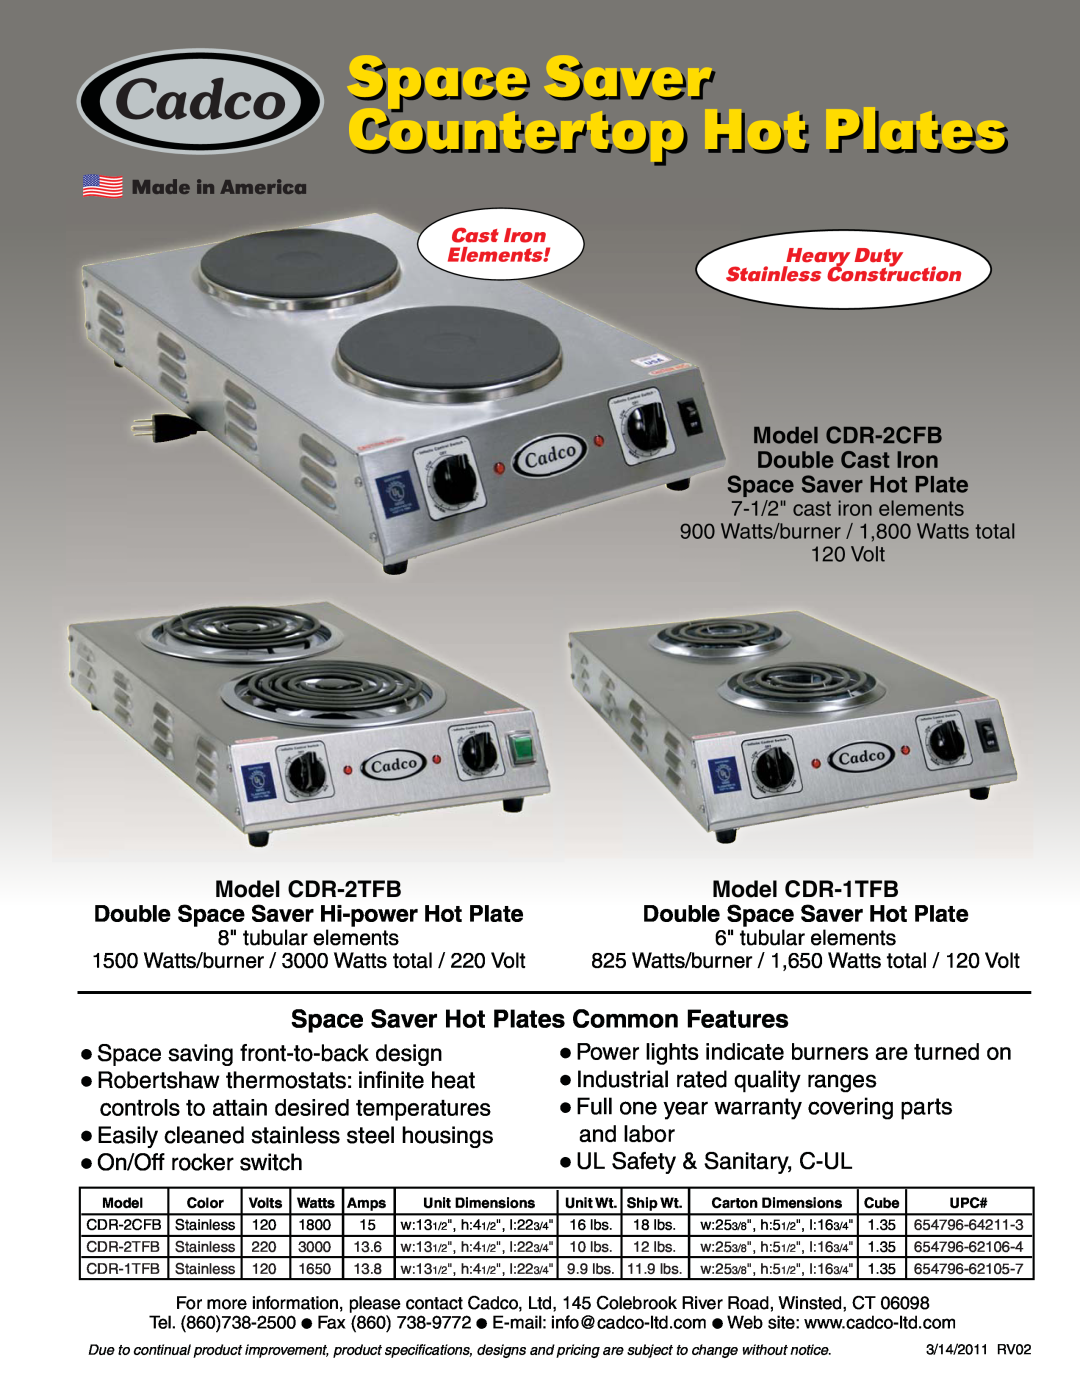 Cadco CDR-1TFB specifications Space Saver Countertop Hot Plates, Space Saver Hot Plates Common Features, Model CDR-2TFB 